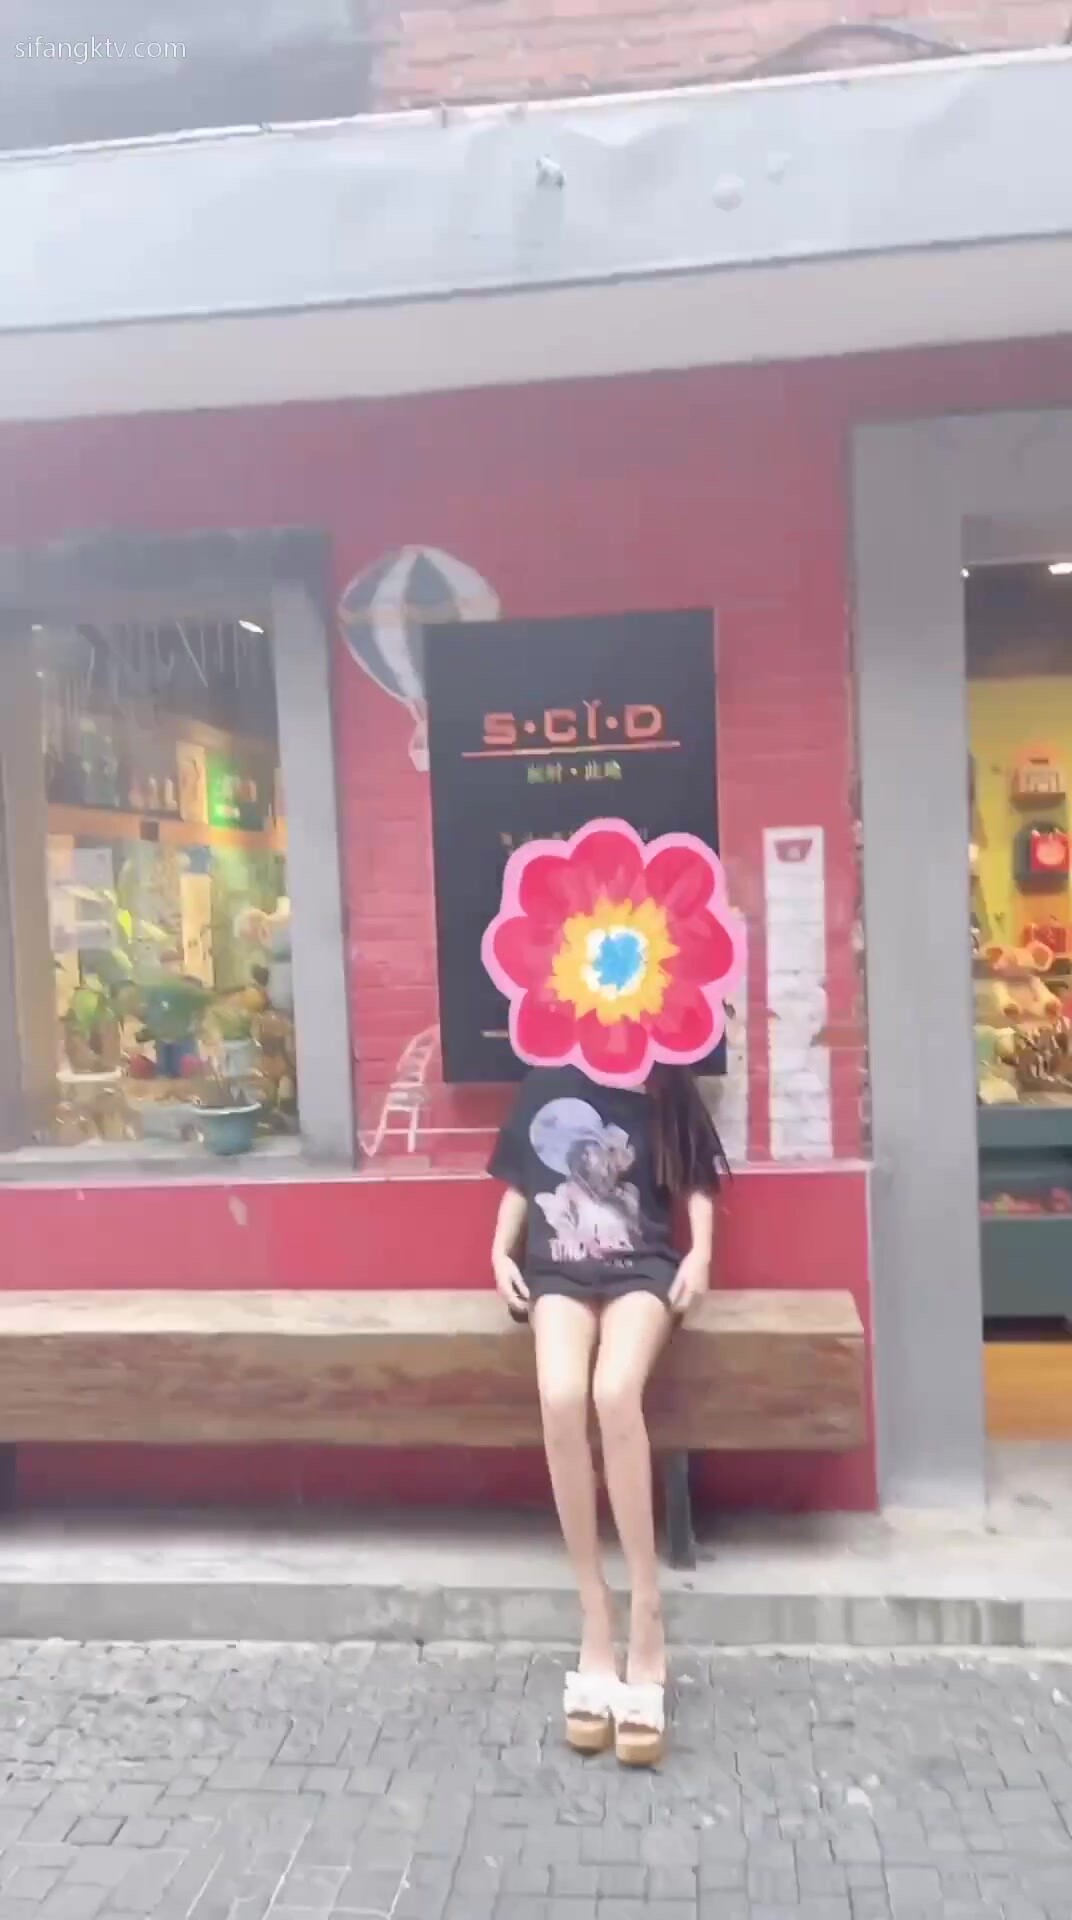 Nana, a top revealing artist, is now showing off her latest crazy reveals, boldly walking down the street like she's in no man's land, revealing herself in front of people in all kinds of ways, really hanging out (4)